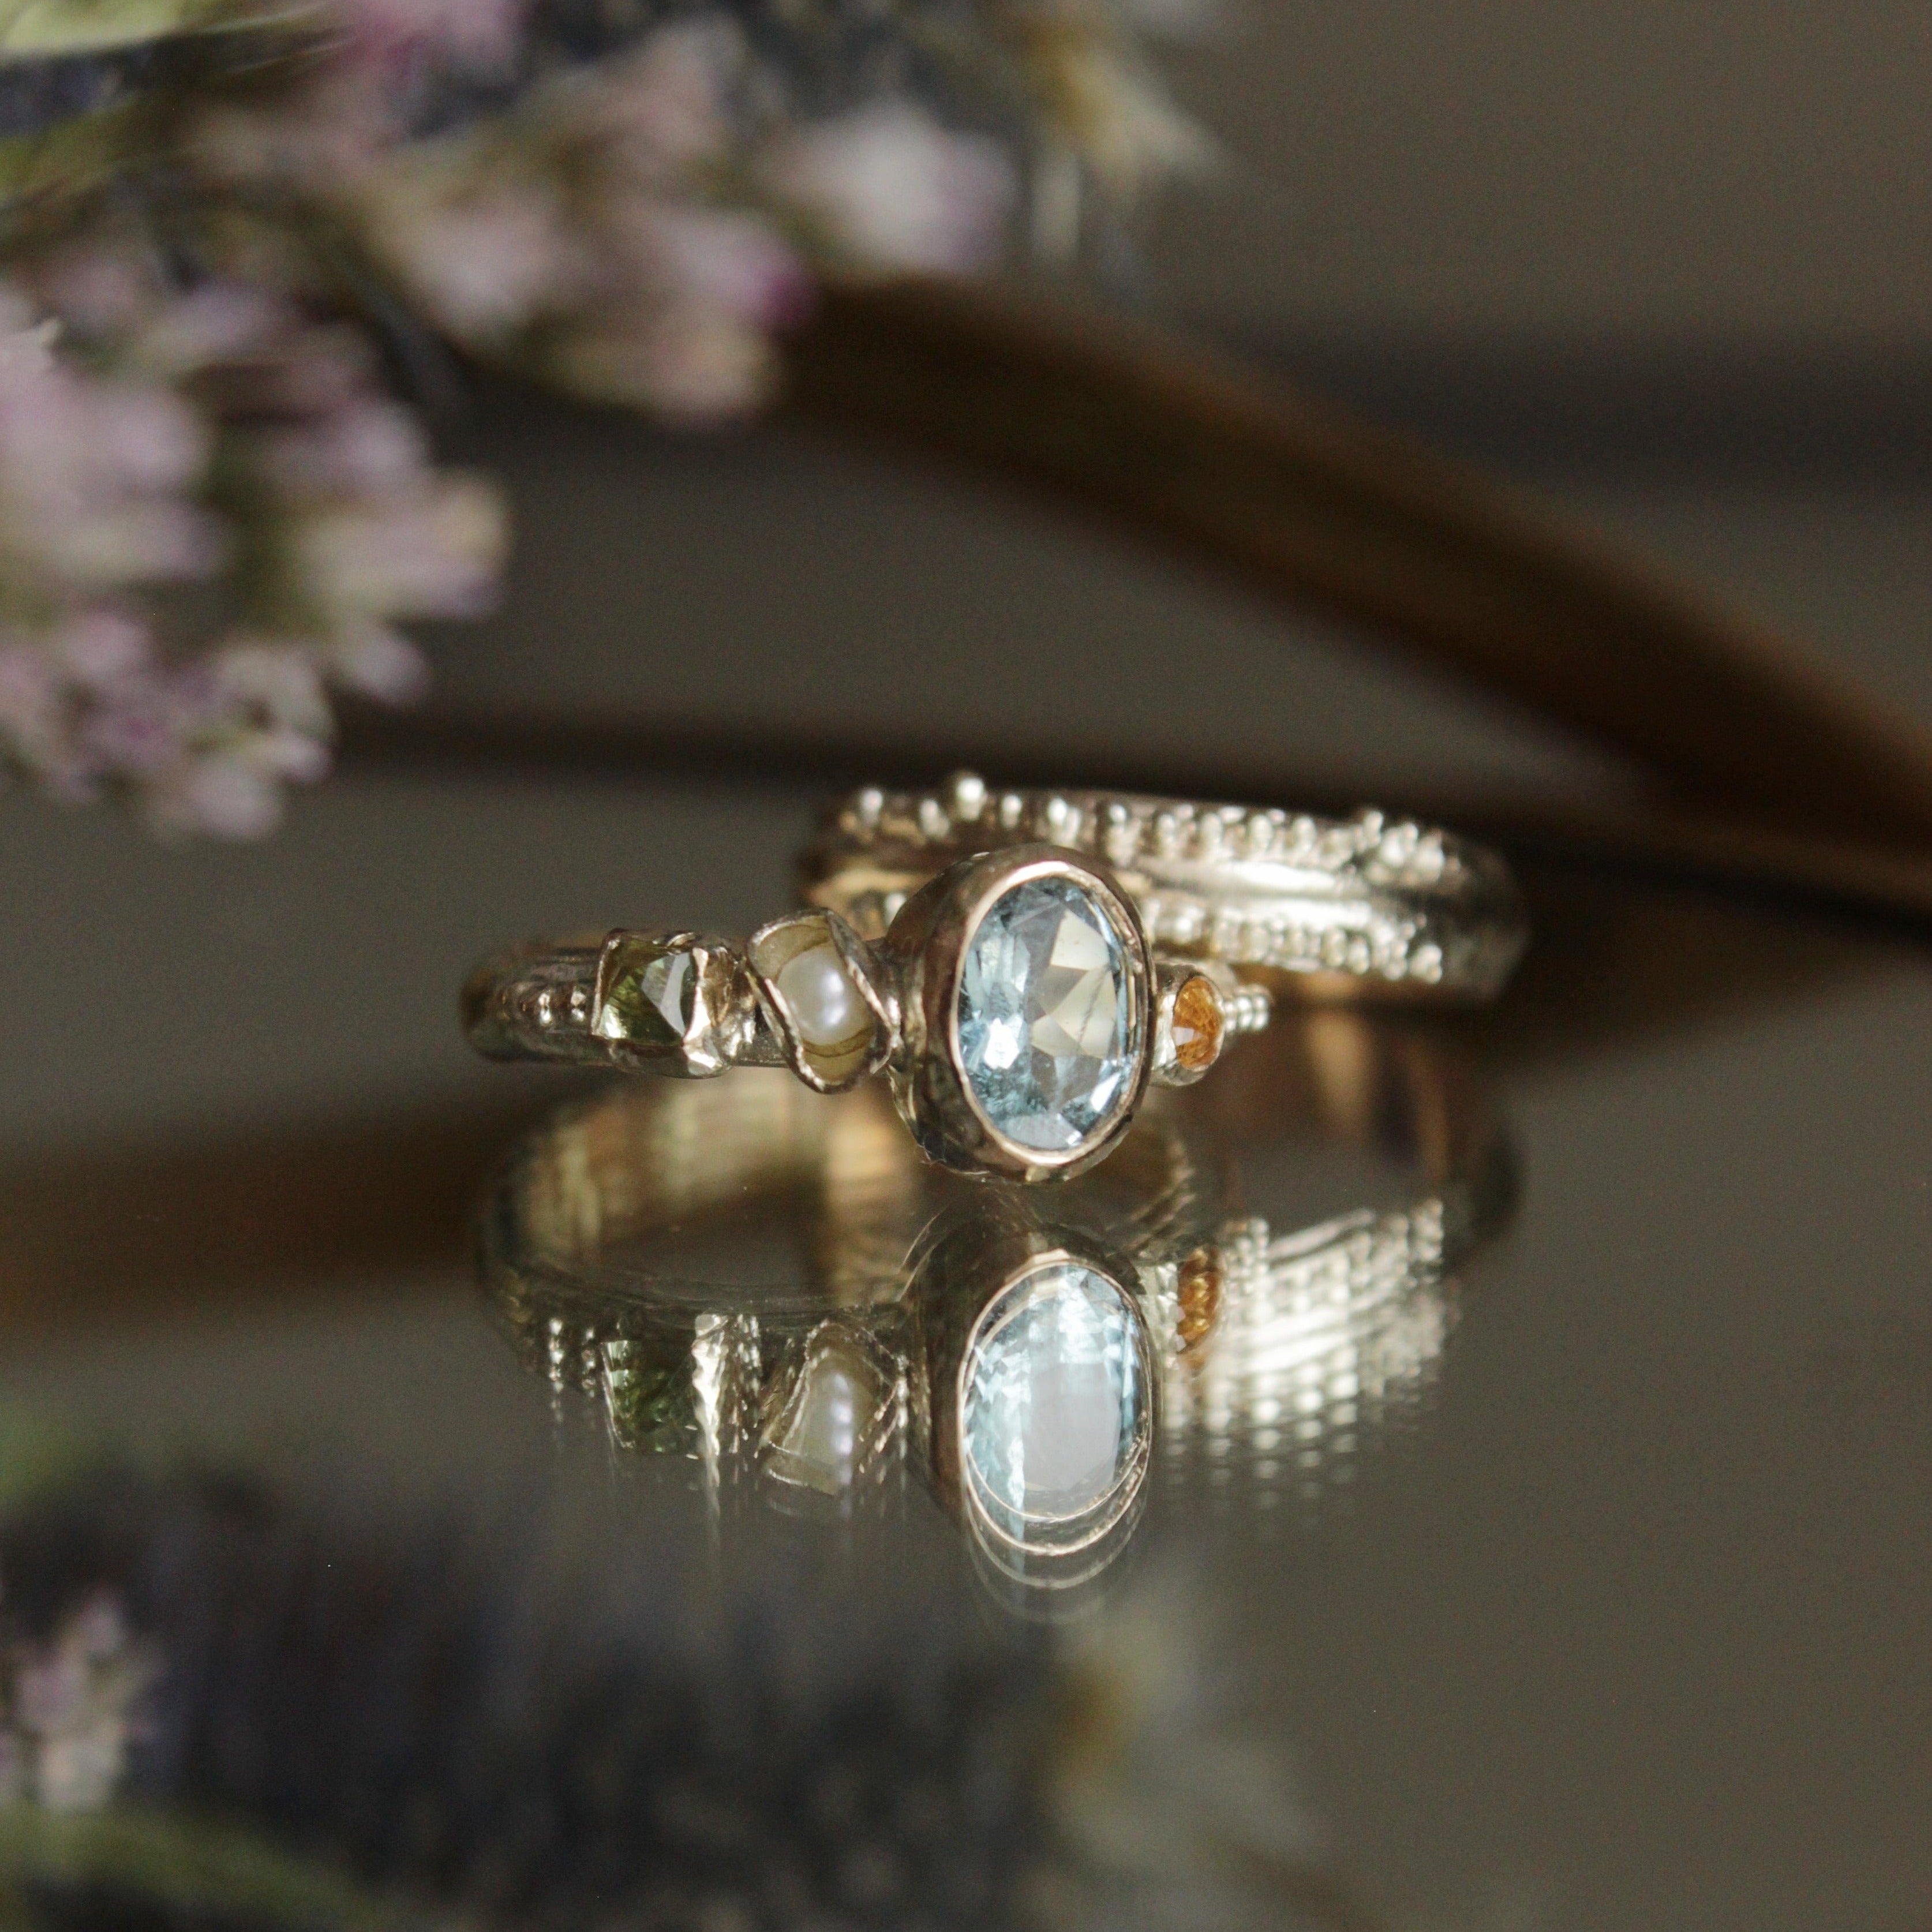 Bespoke, hand crafted 9ct gold alternative engagement ring. The ring features a vibrant oval Aquamarine, a pearl and sapphires. Handcrafted in Frome by Josie Mitchell Jewellery for the alternative bride and ocean lover.